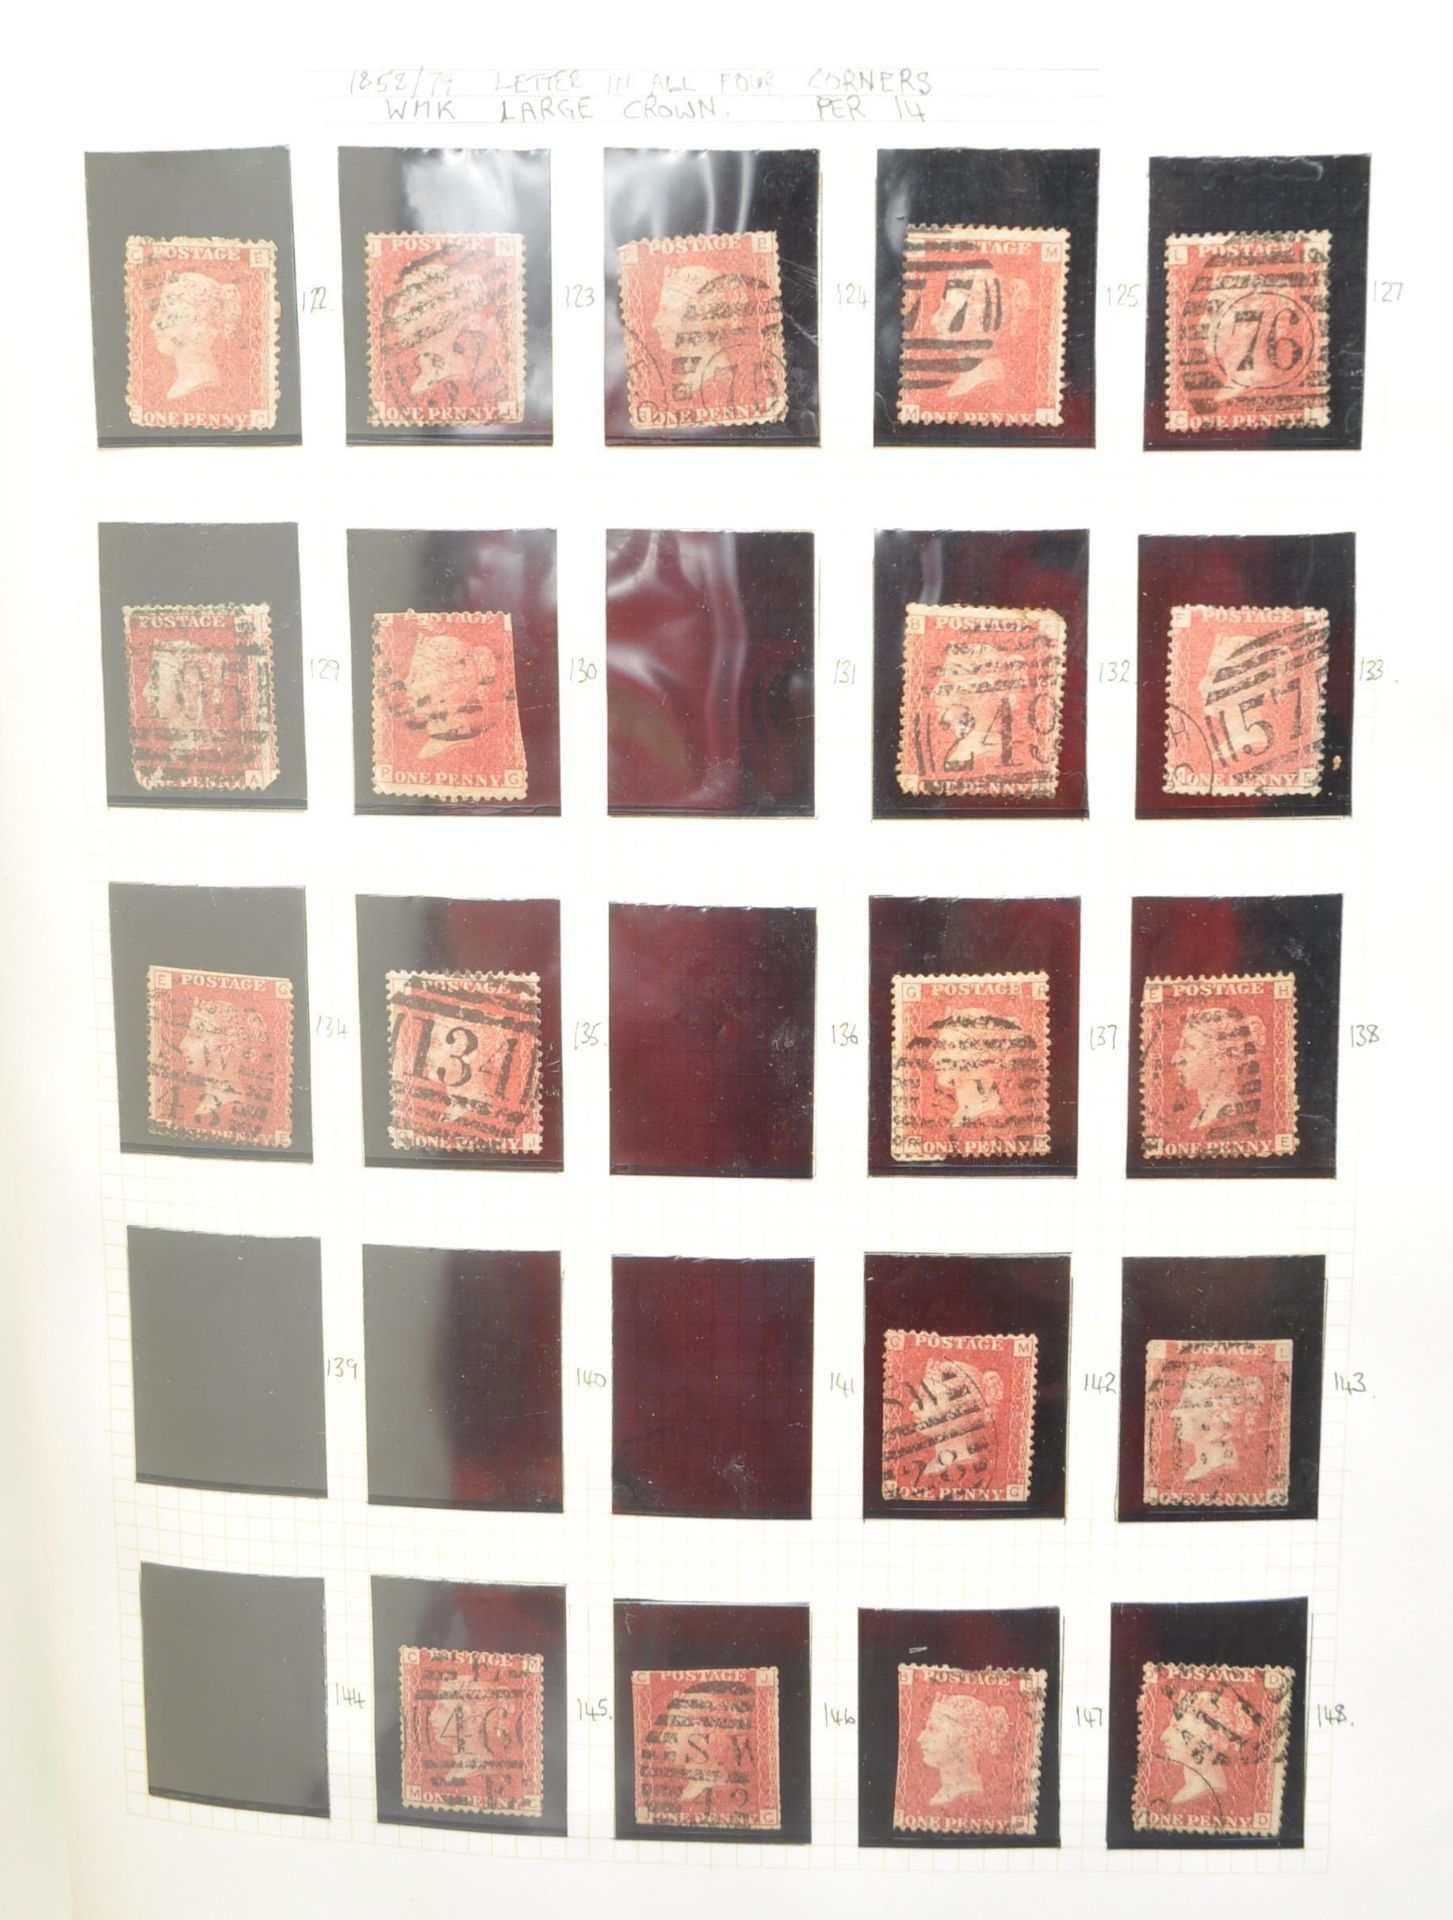 LARGE COLLECTION OF 600+ PENNY RED STAMPS - Image 8 of 8